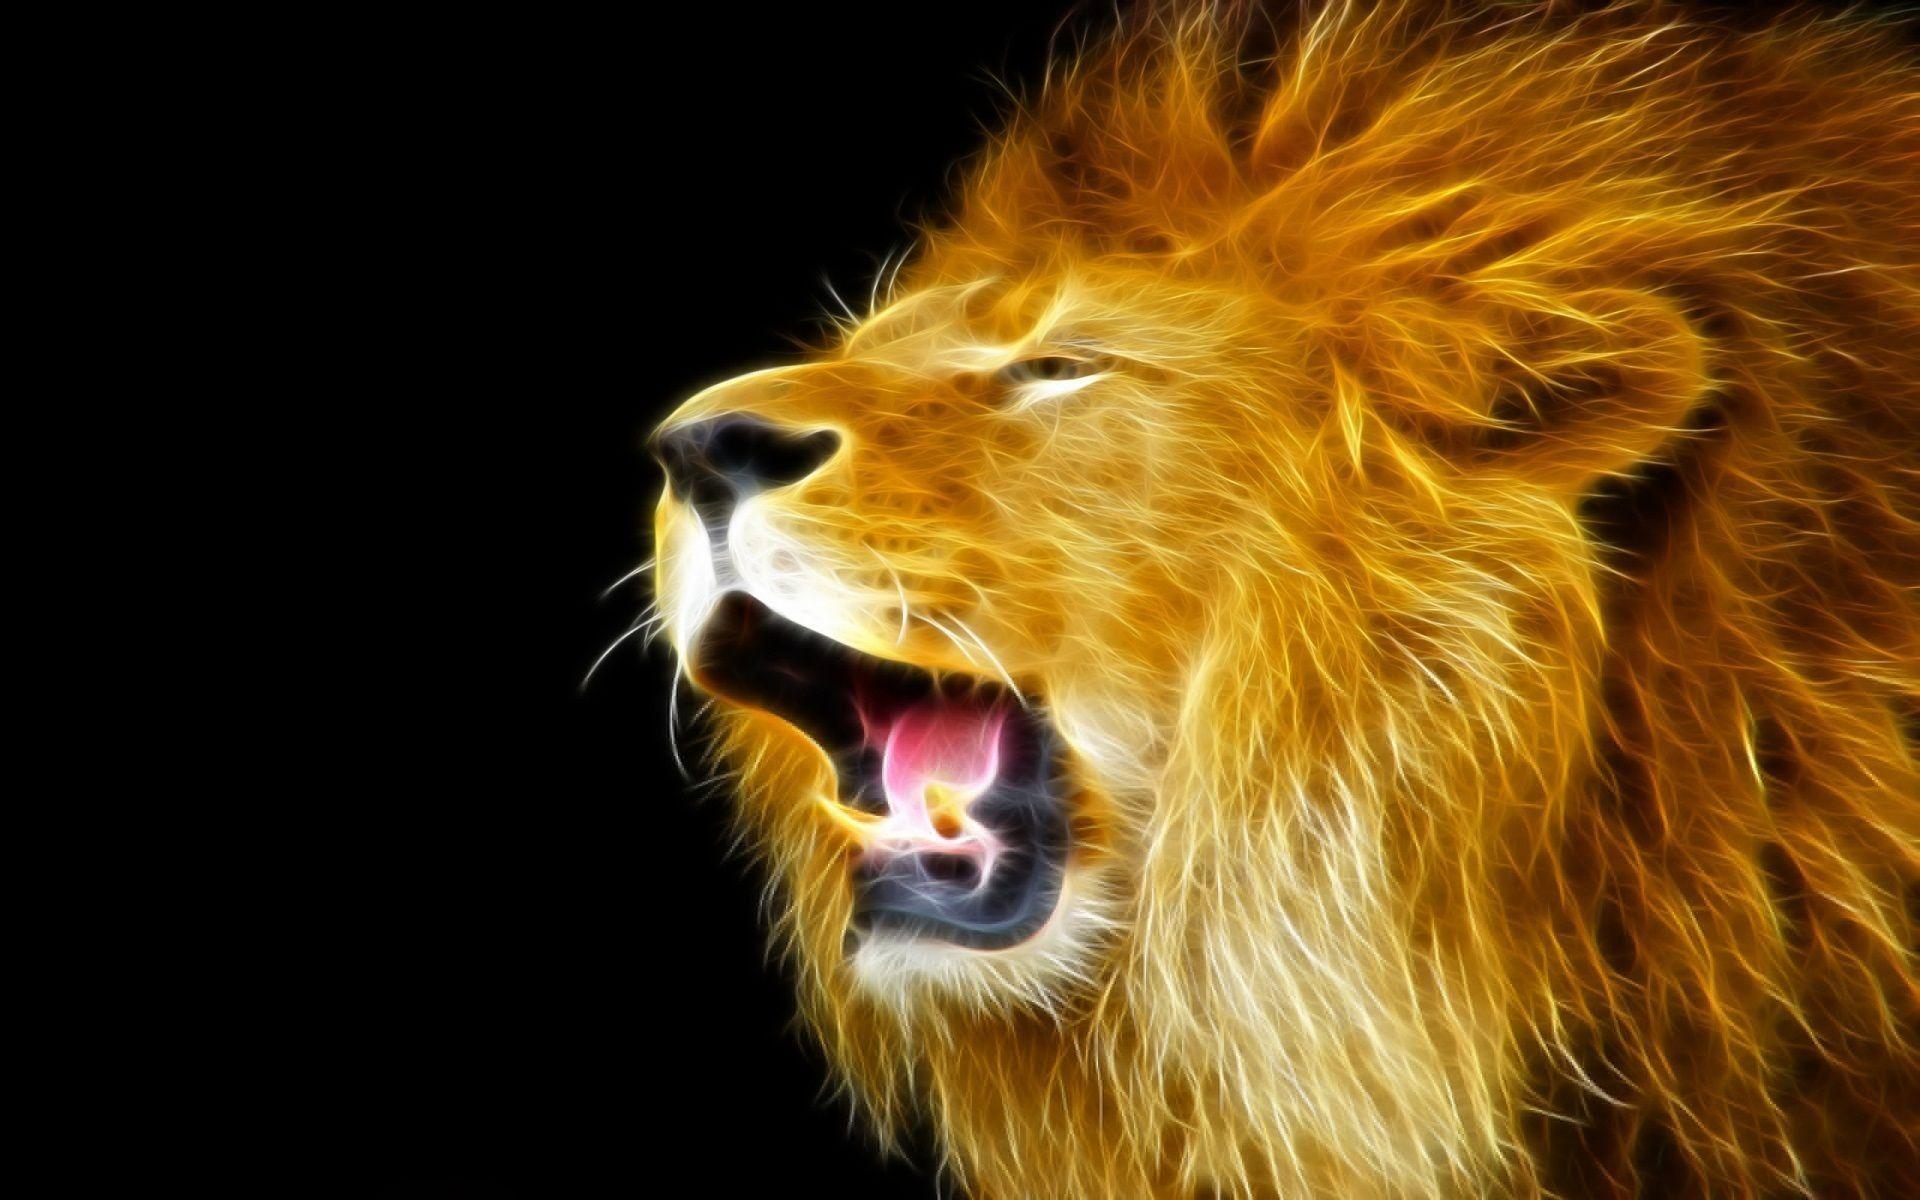 3D Lion Wallpaper 1280x1024 Save Best New Refrence Fresh